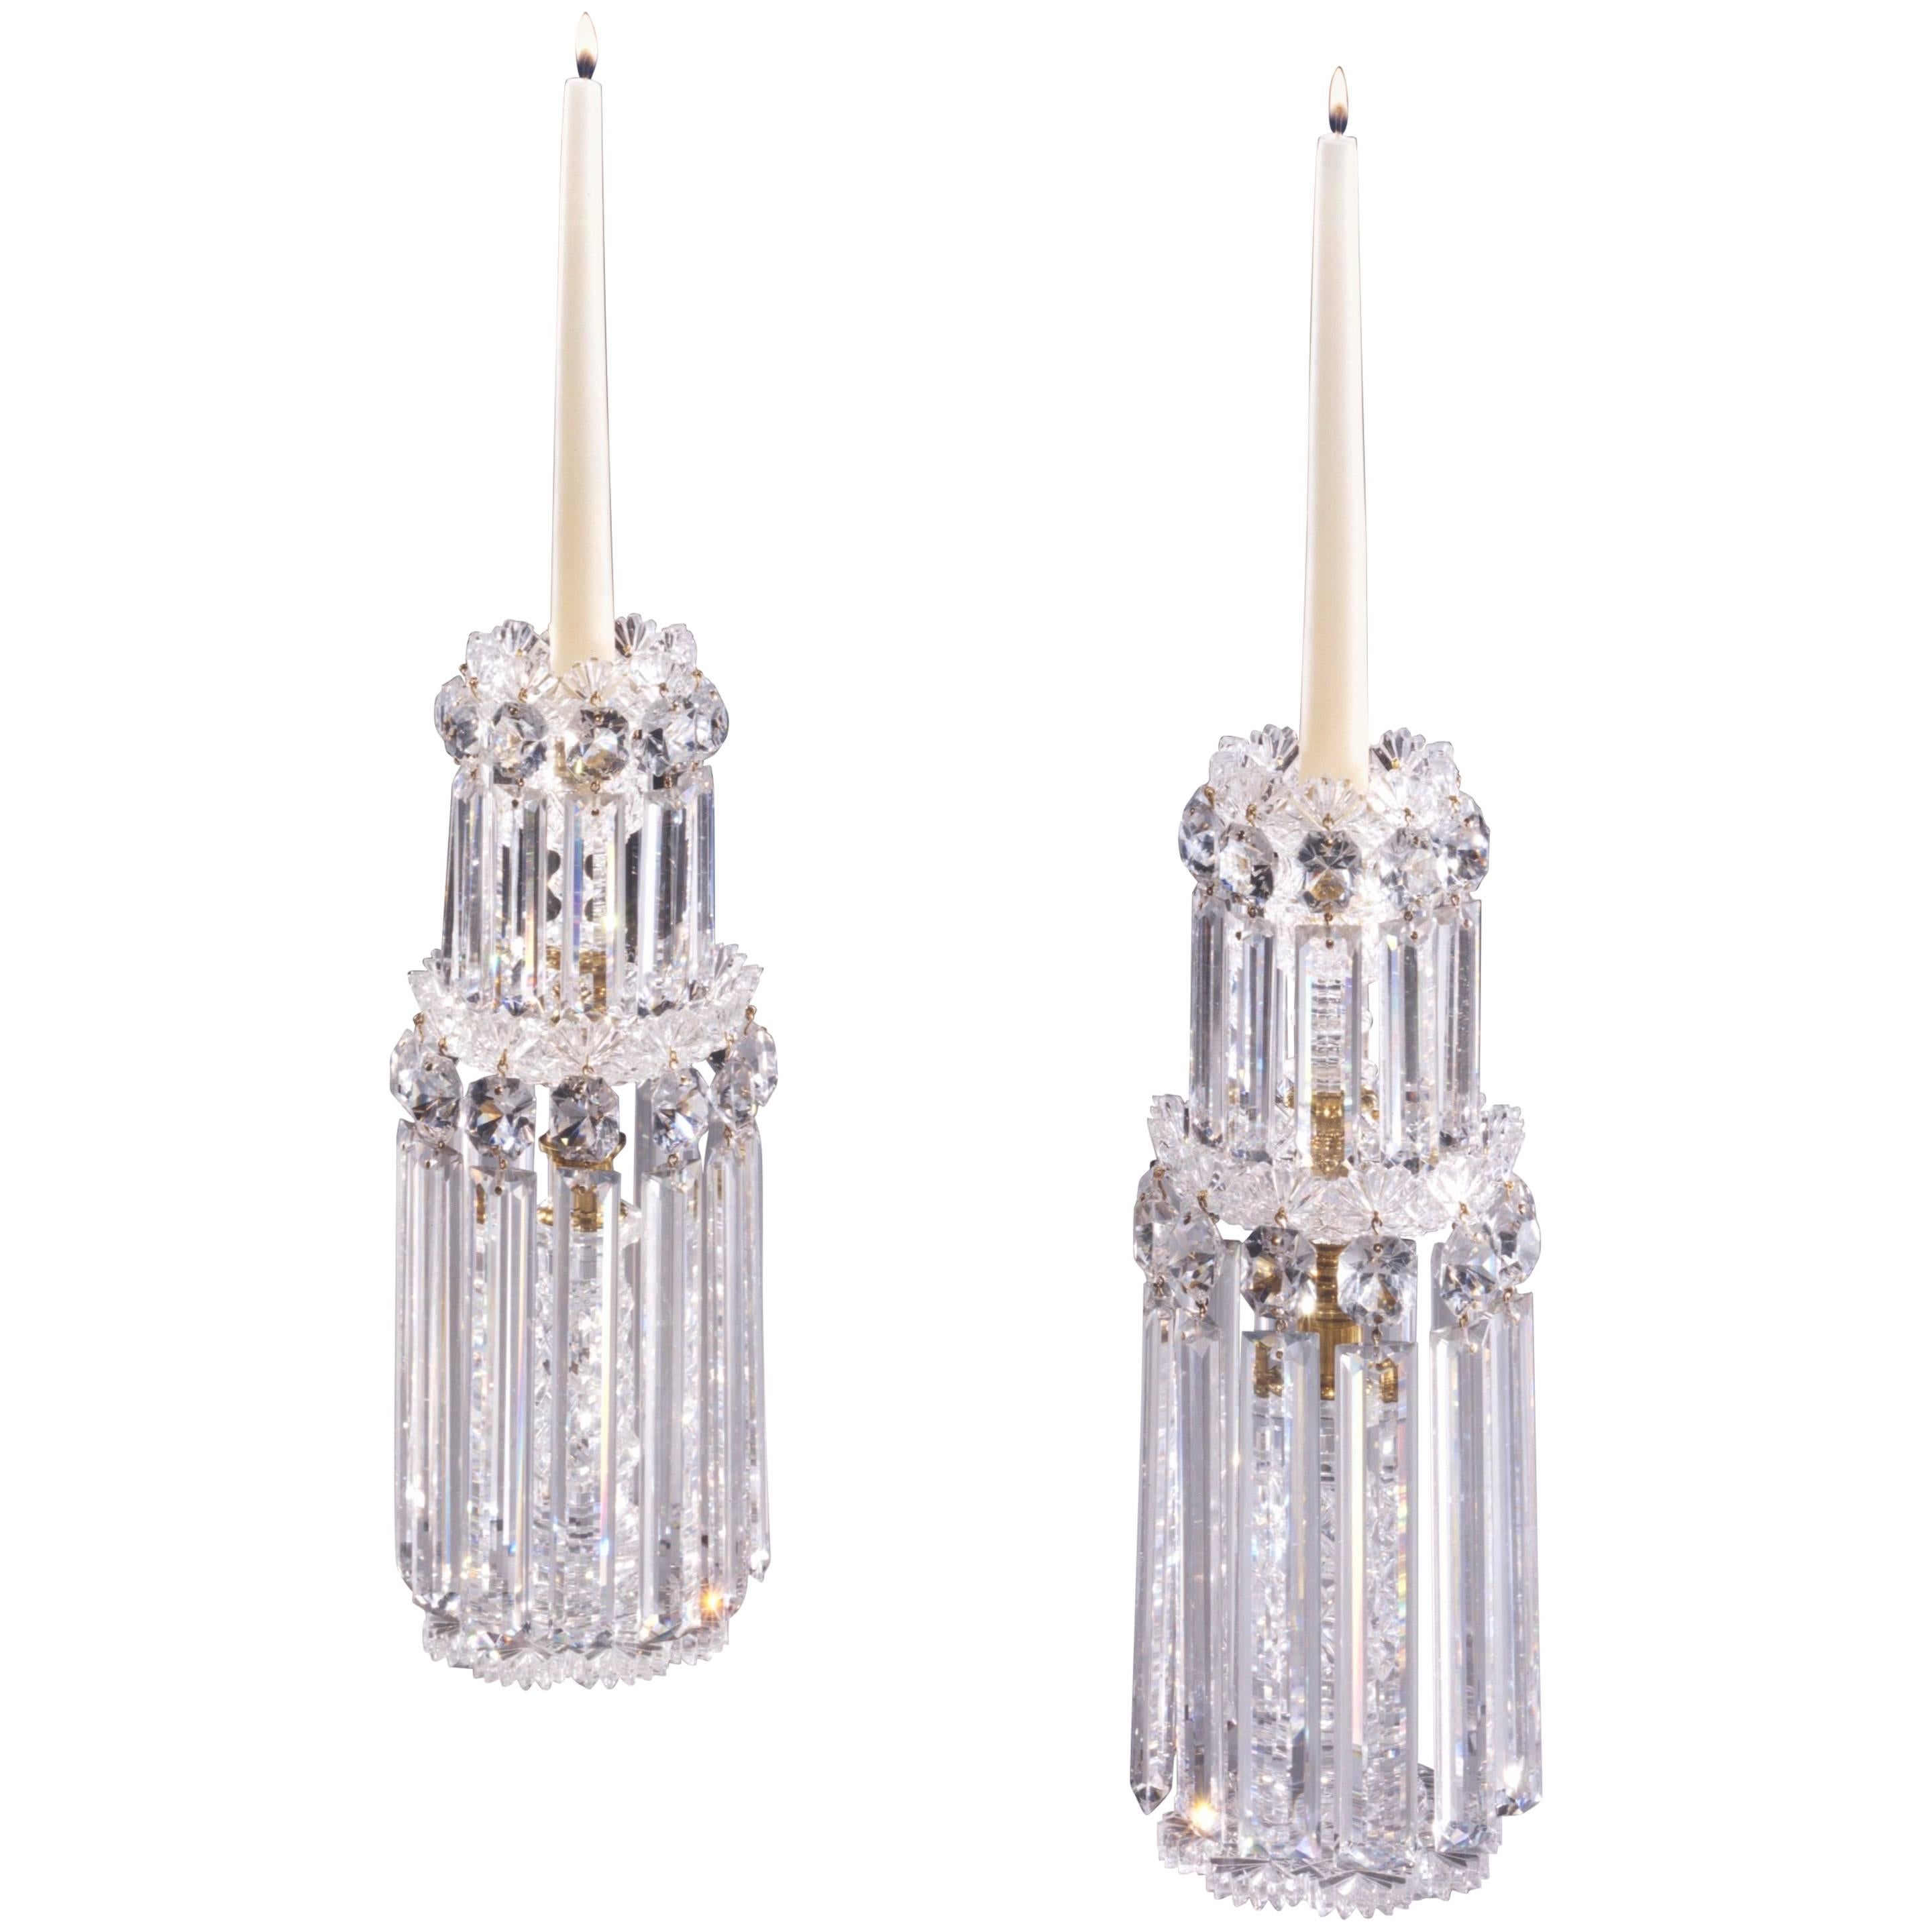 Pair of William IV Cut-Glass Candlesticks For Sale